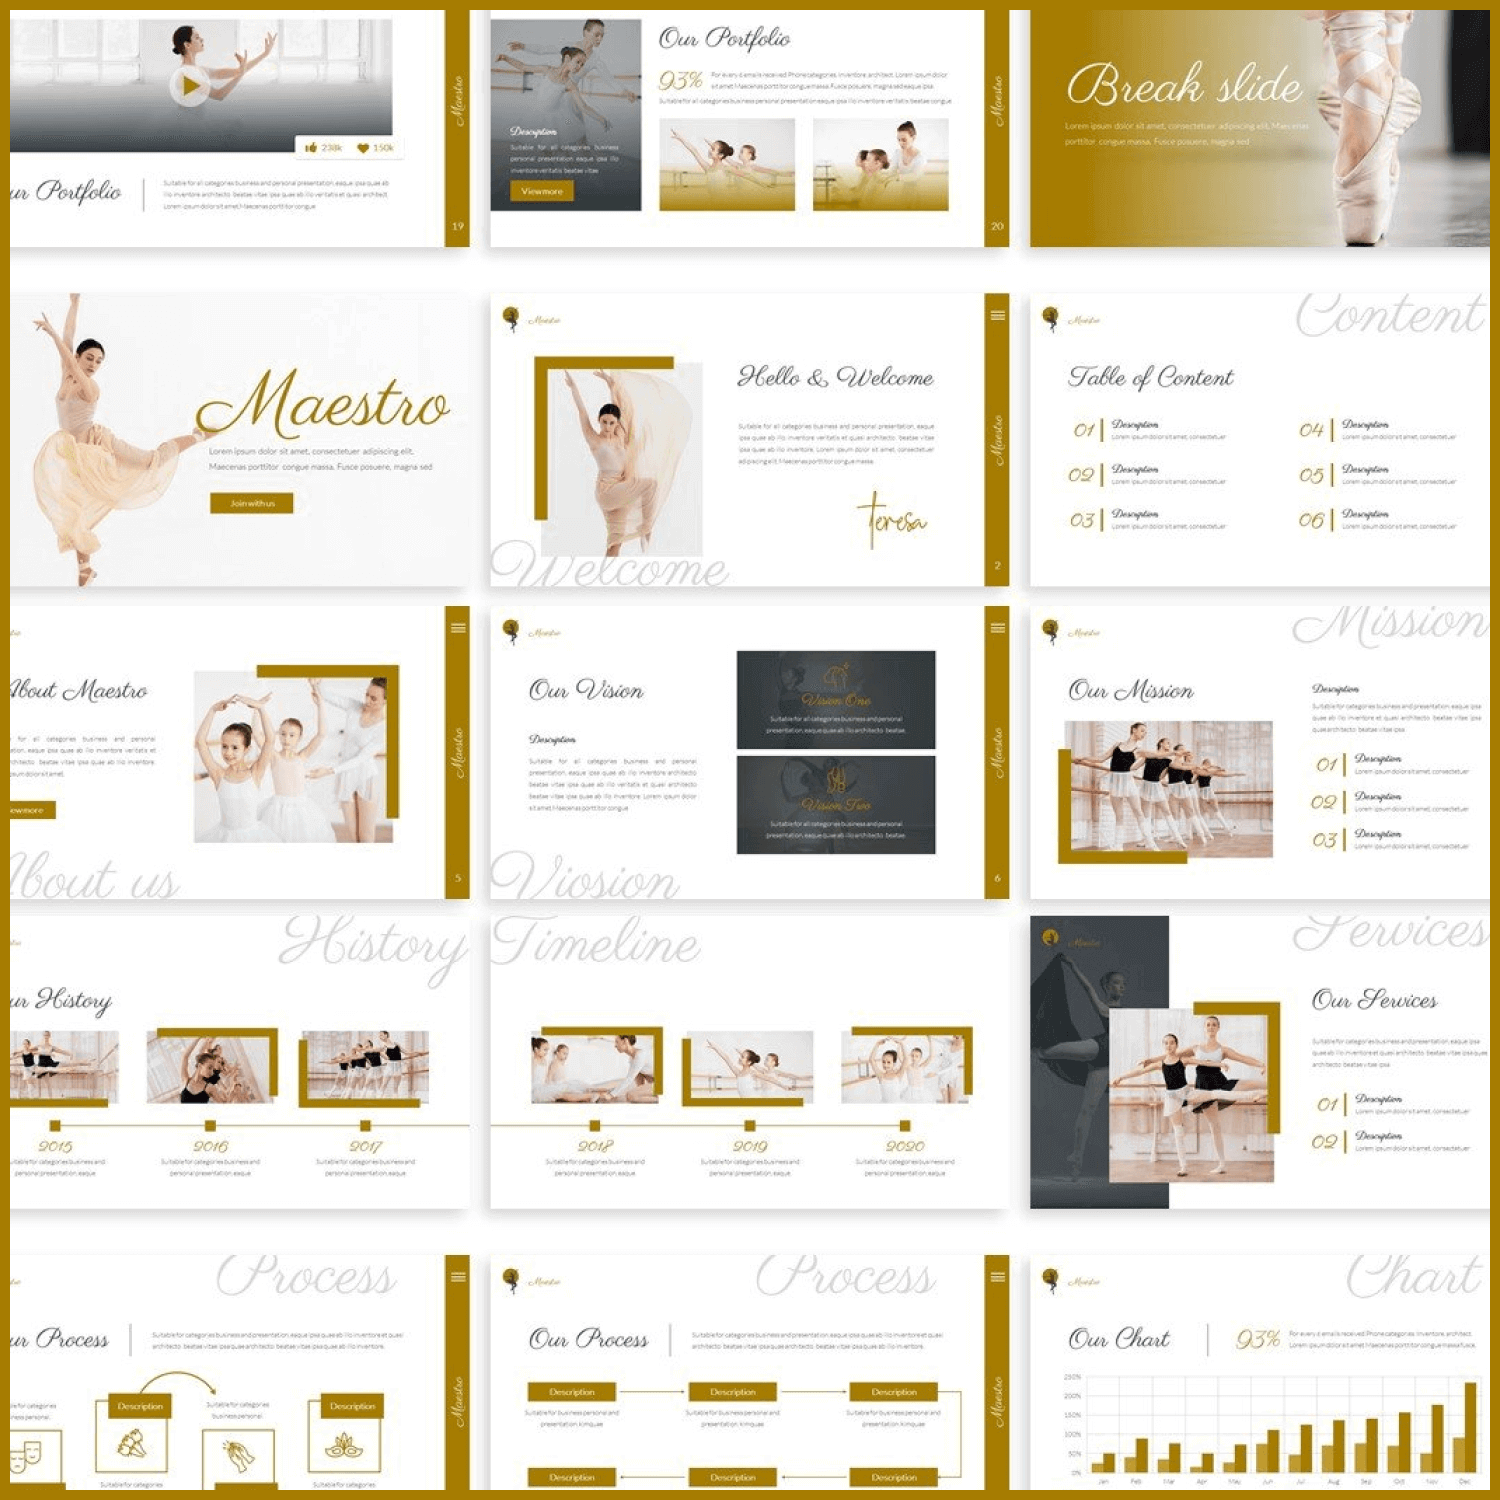 Welcome to Maestro Ballet Powerpoint Template.